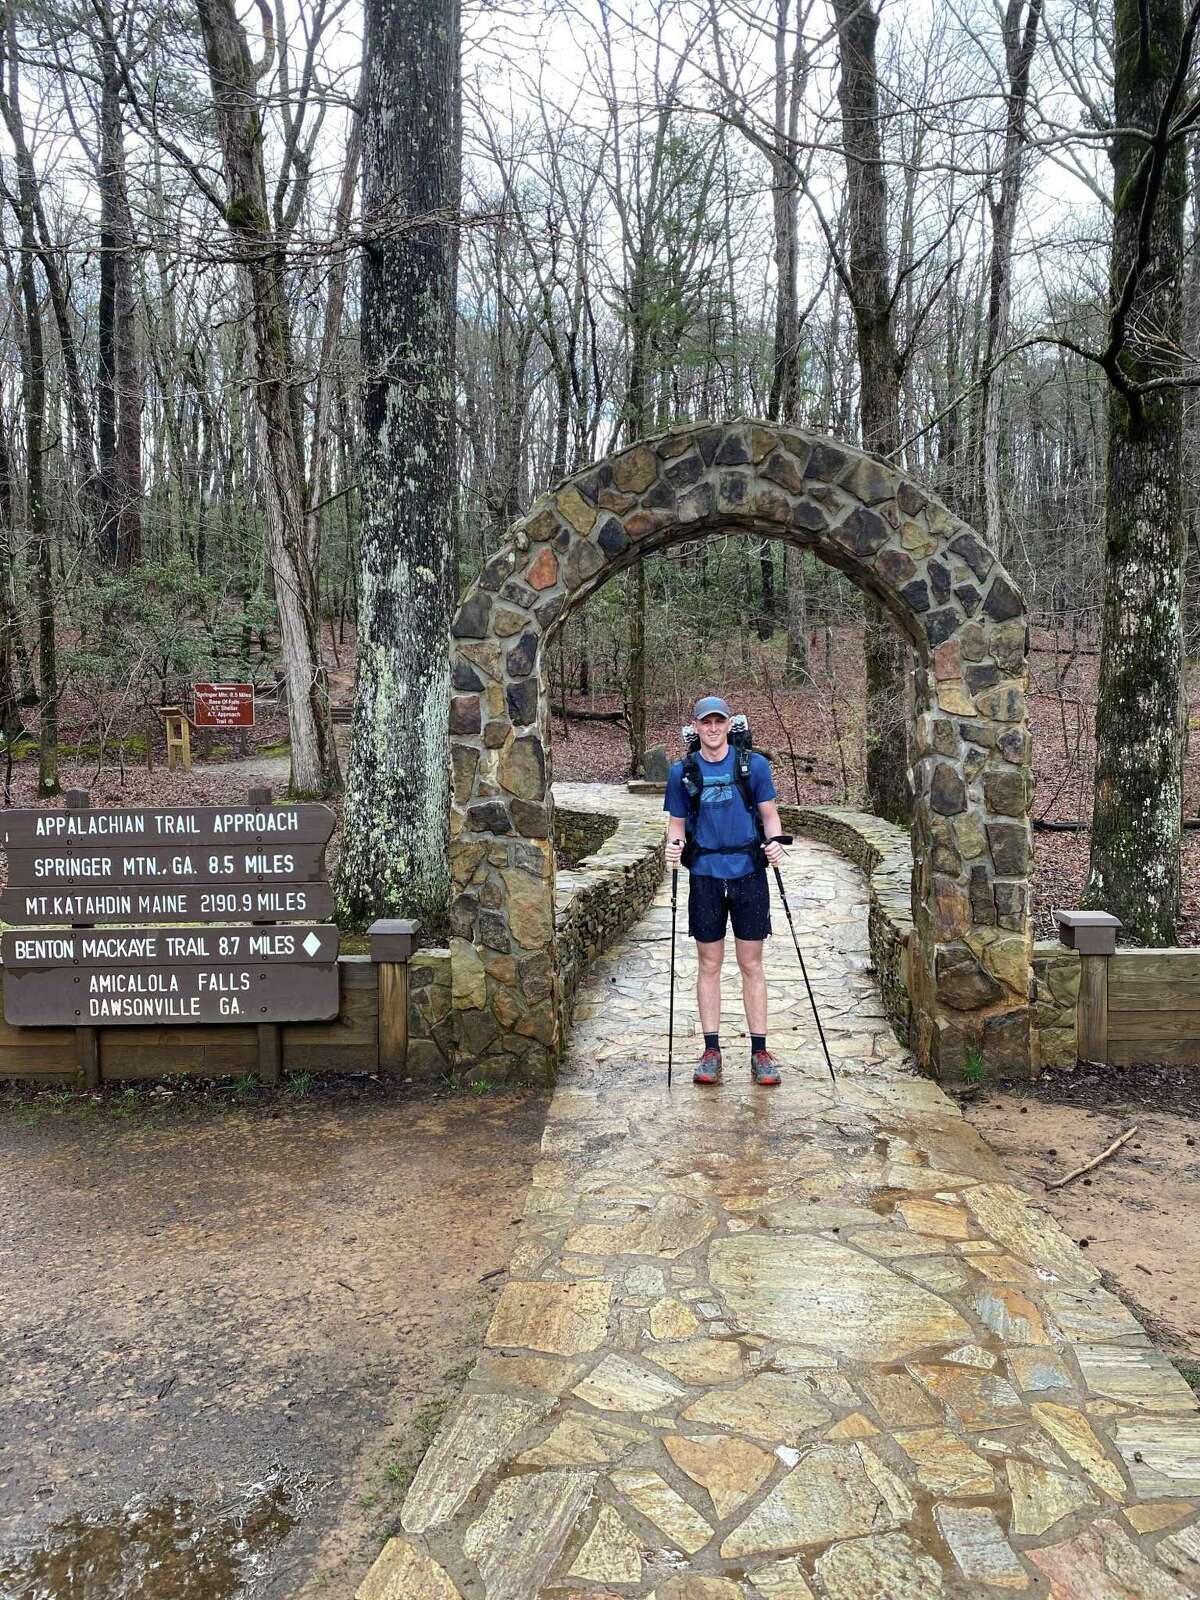 It's March 18 and Zachary Neschich is ready to embark on his five-month trek on the Appalachian Trail. Zachary had to hike eight miles just to actually begin the trail.